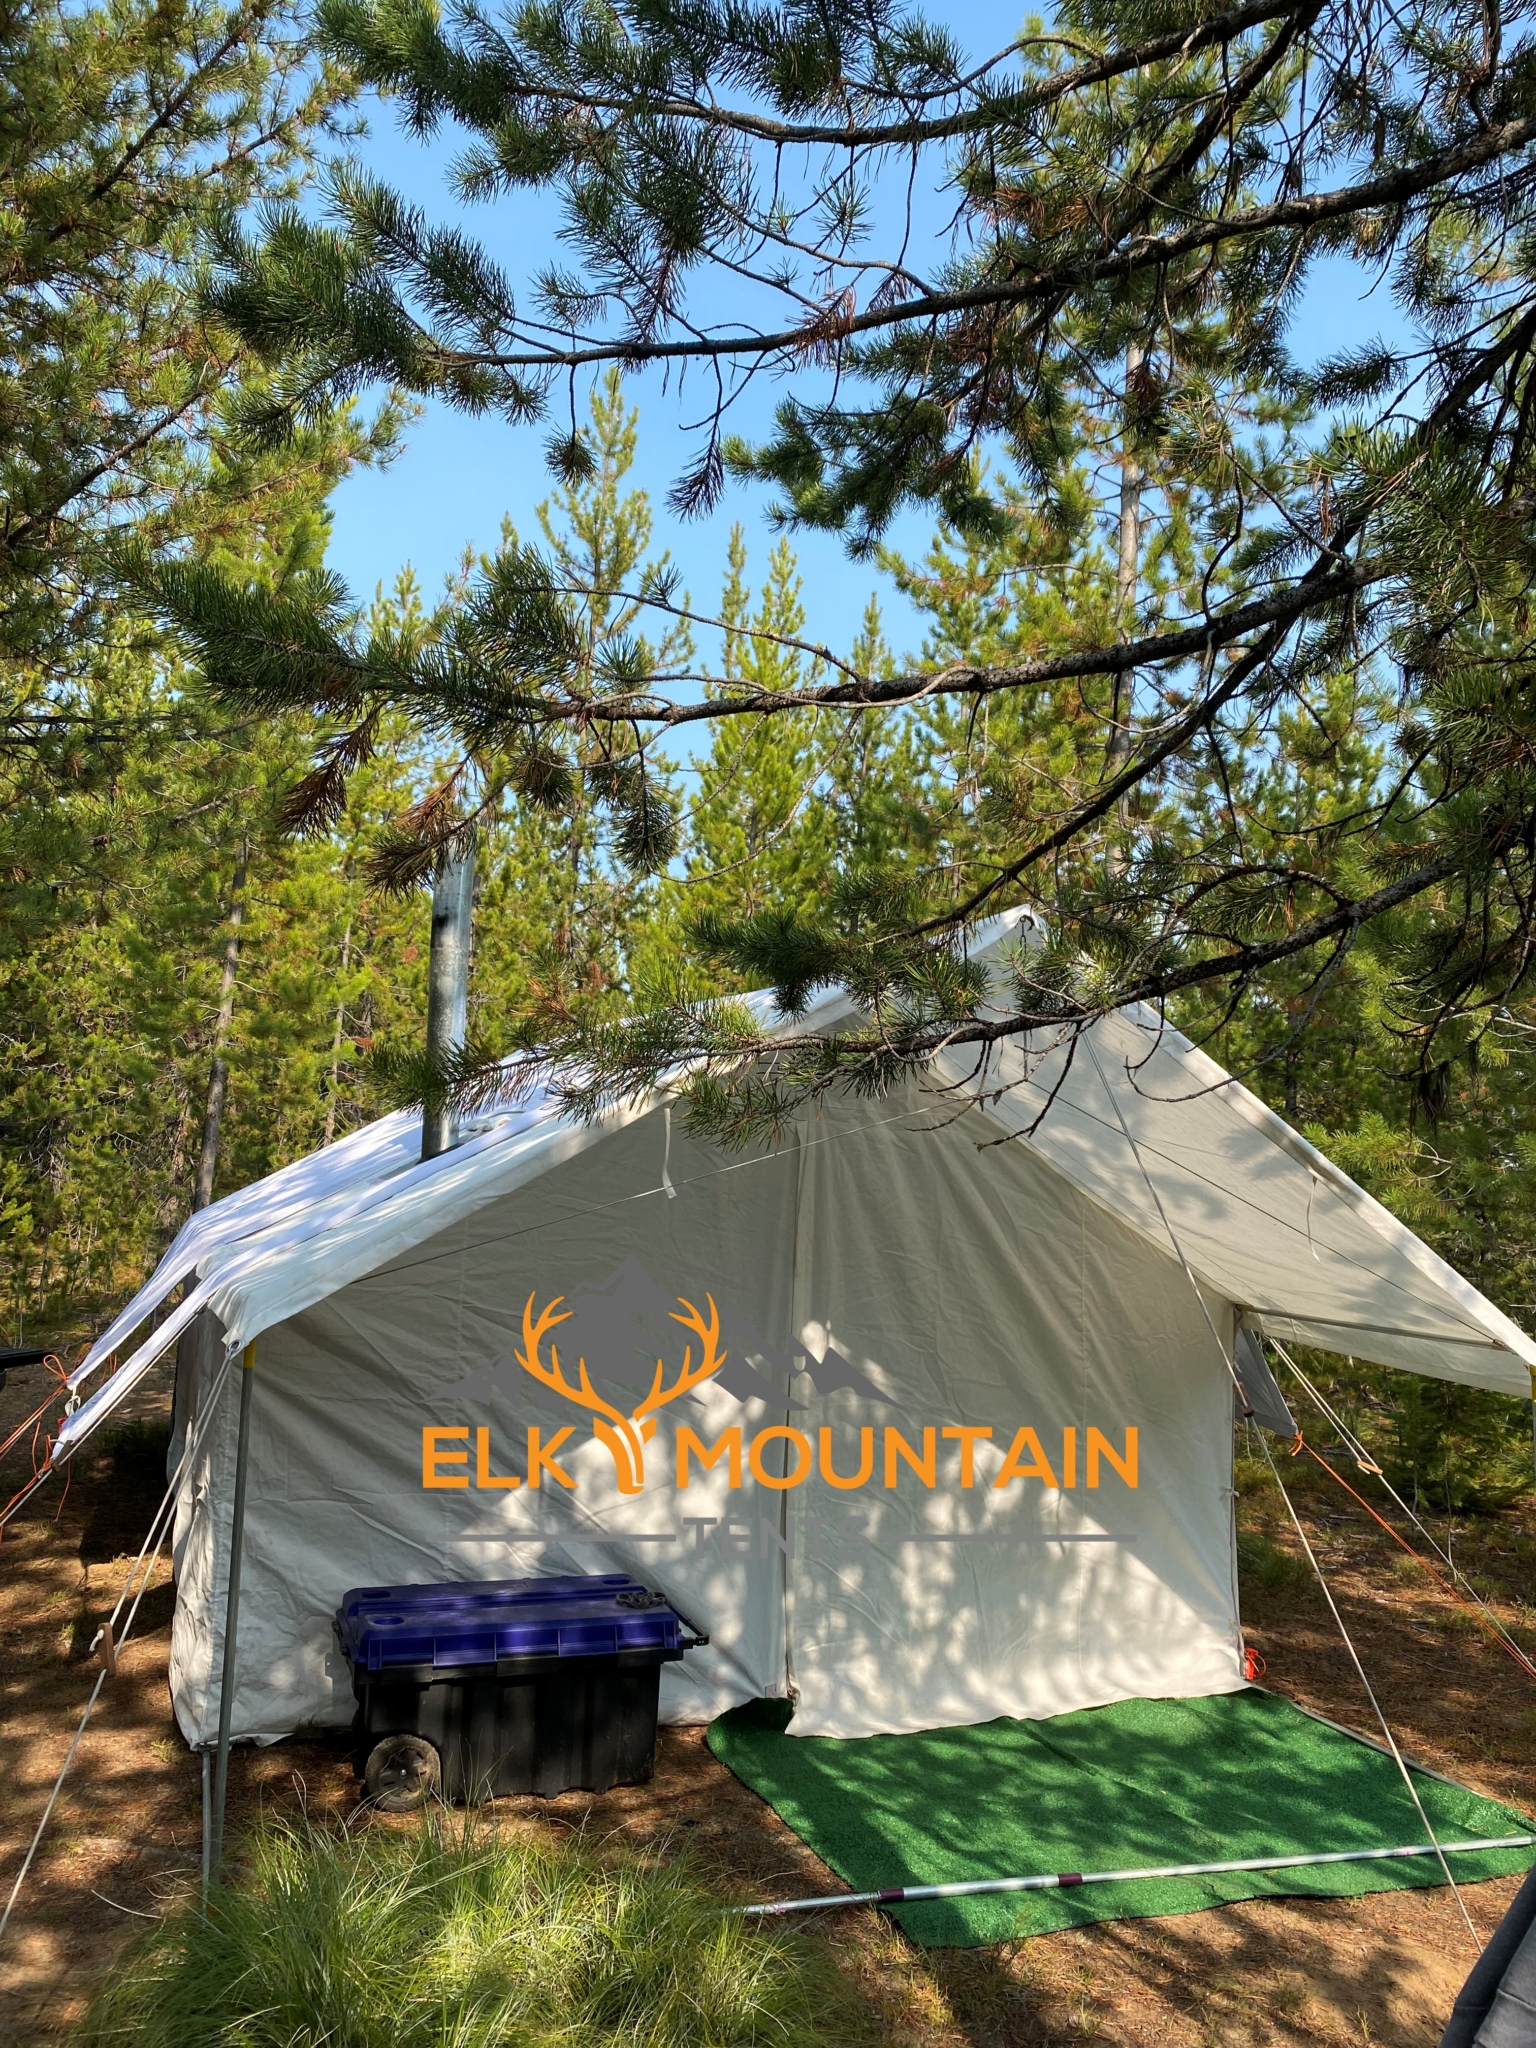 stove mat living in a wall tent difference between cotton and polyester best tent stove canvas tent with wood stove tent with stove vent prospector tent kirkhams tents polyester canvas cheap canvas tents expensive tents quality tents